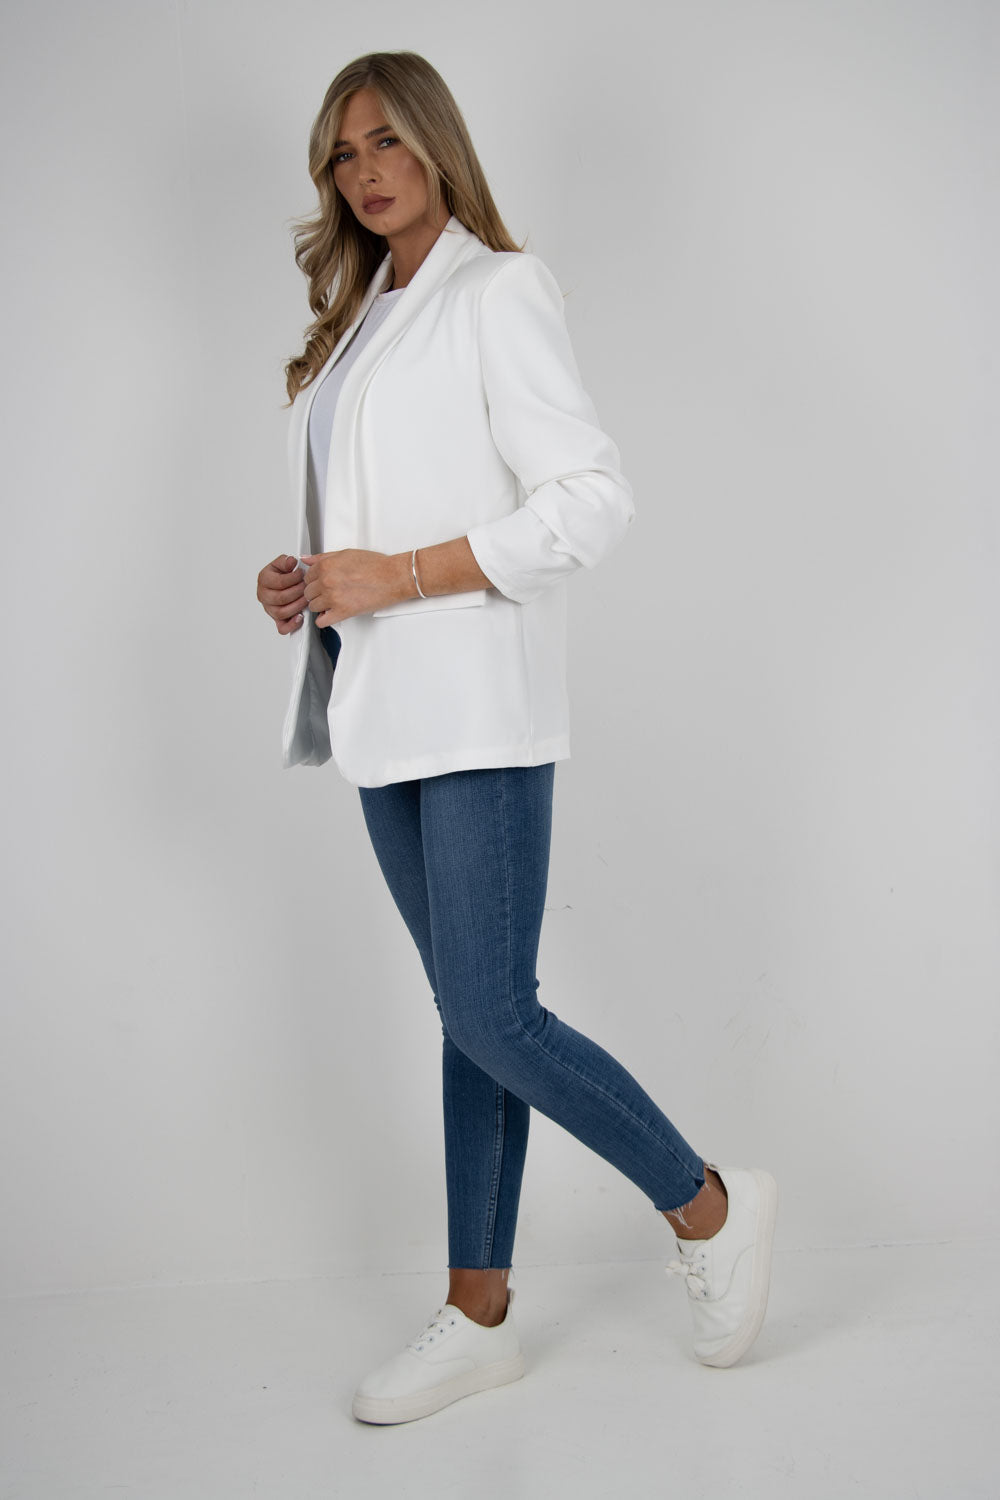 Made in Italy Plain Ruched Sleeve Blazer Jacket